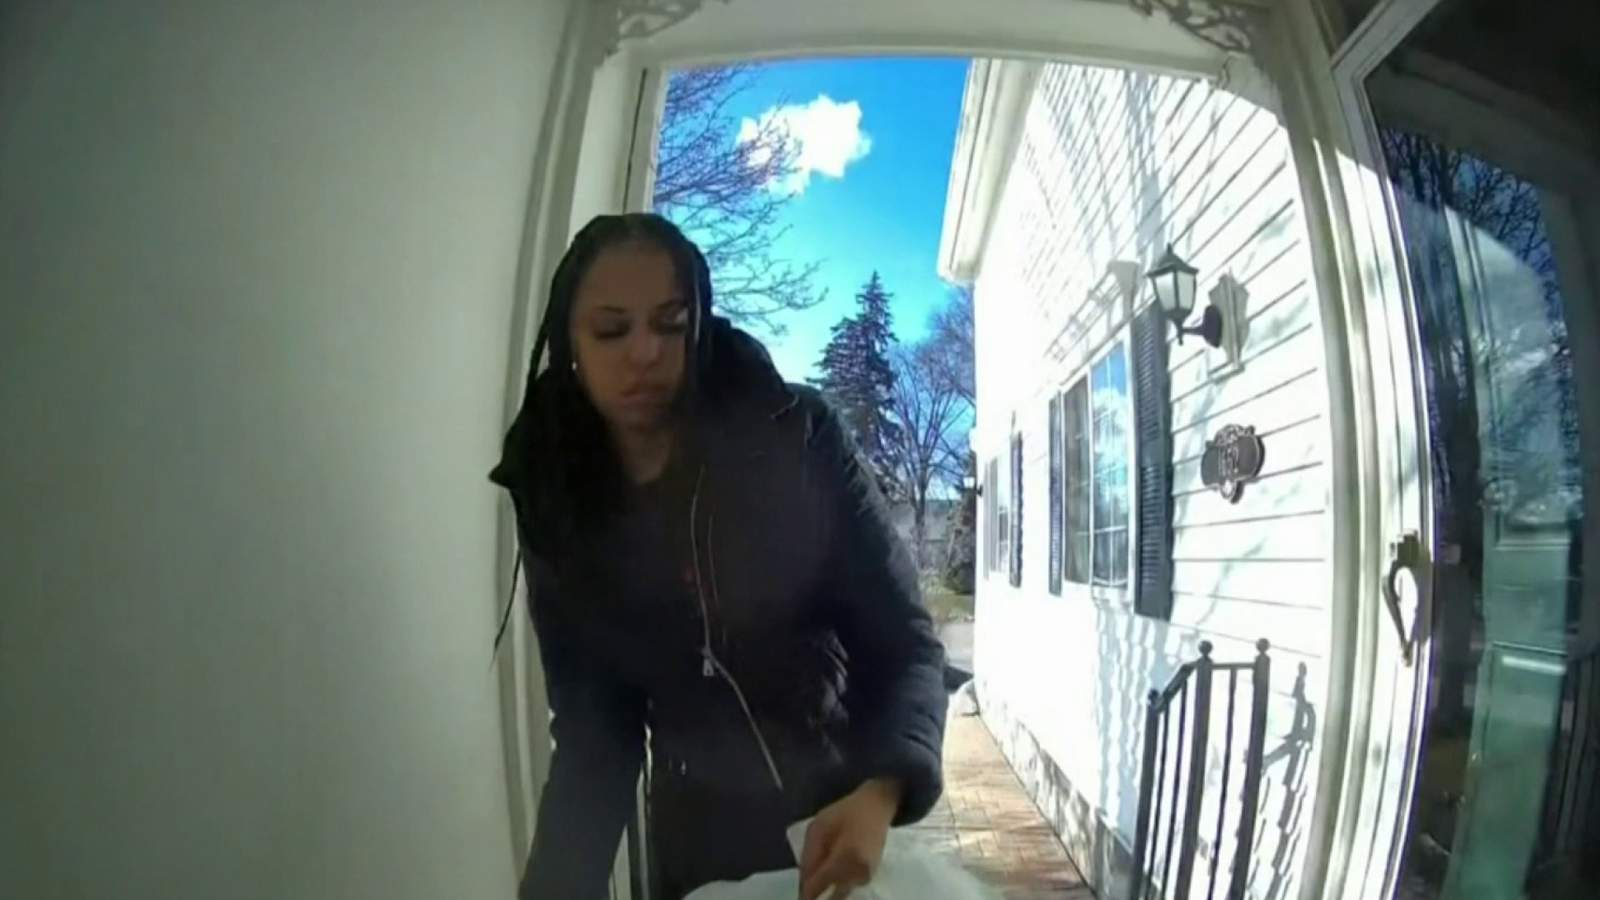 Video captures porch pirate stealing from teacher’s home in Plymouth